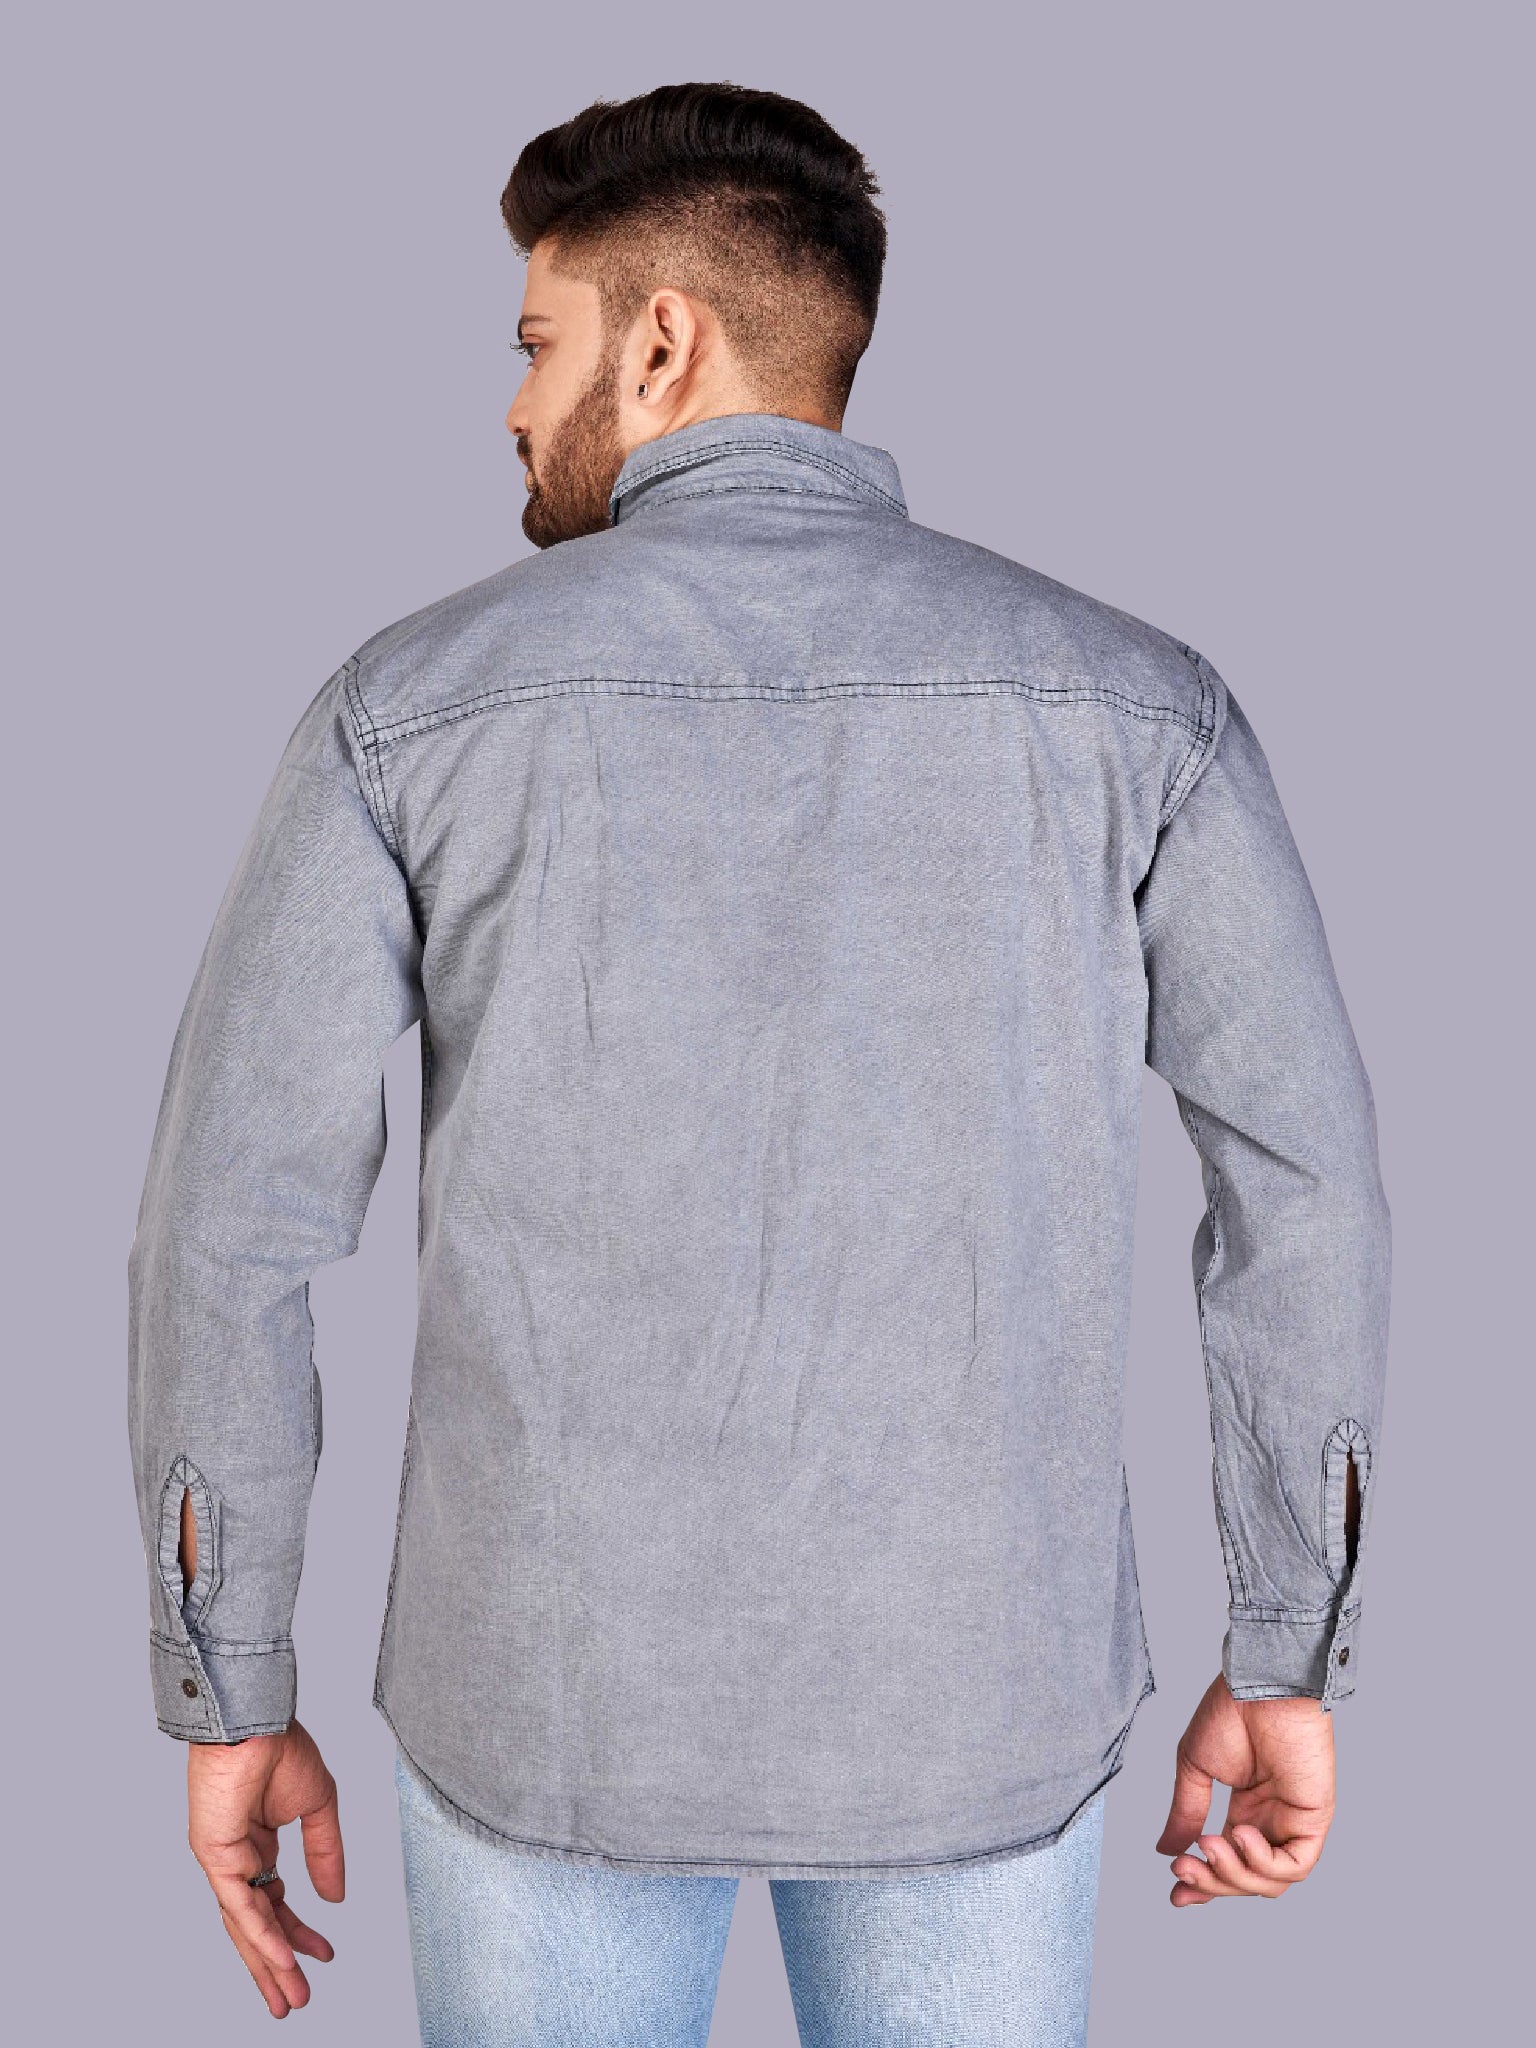 Steel Gray Denim Shirts To Unveiling Refined Style-4